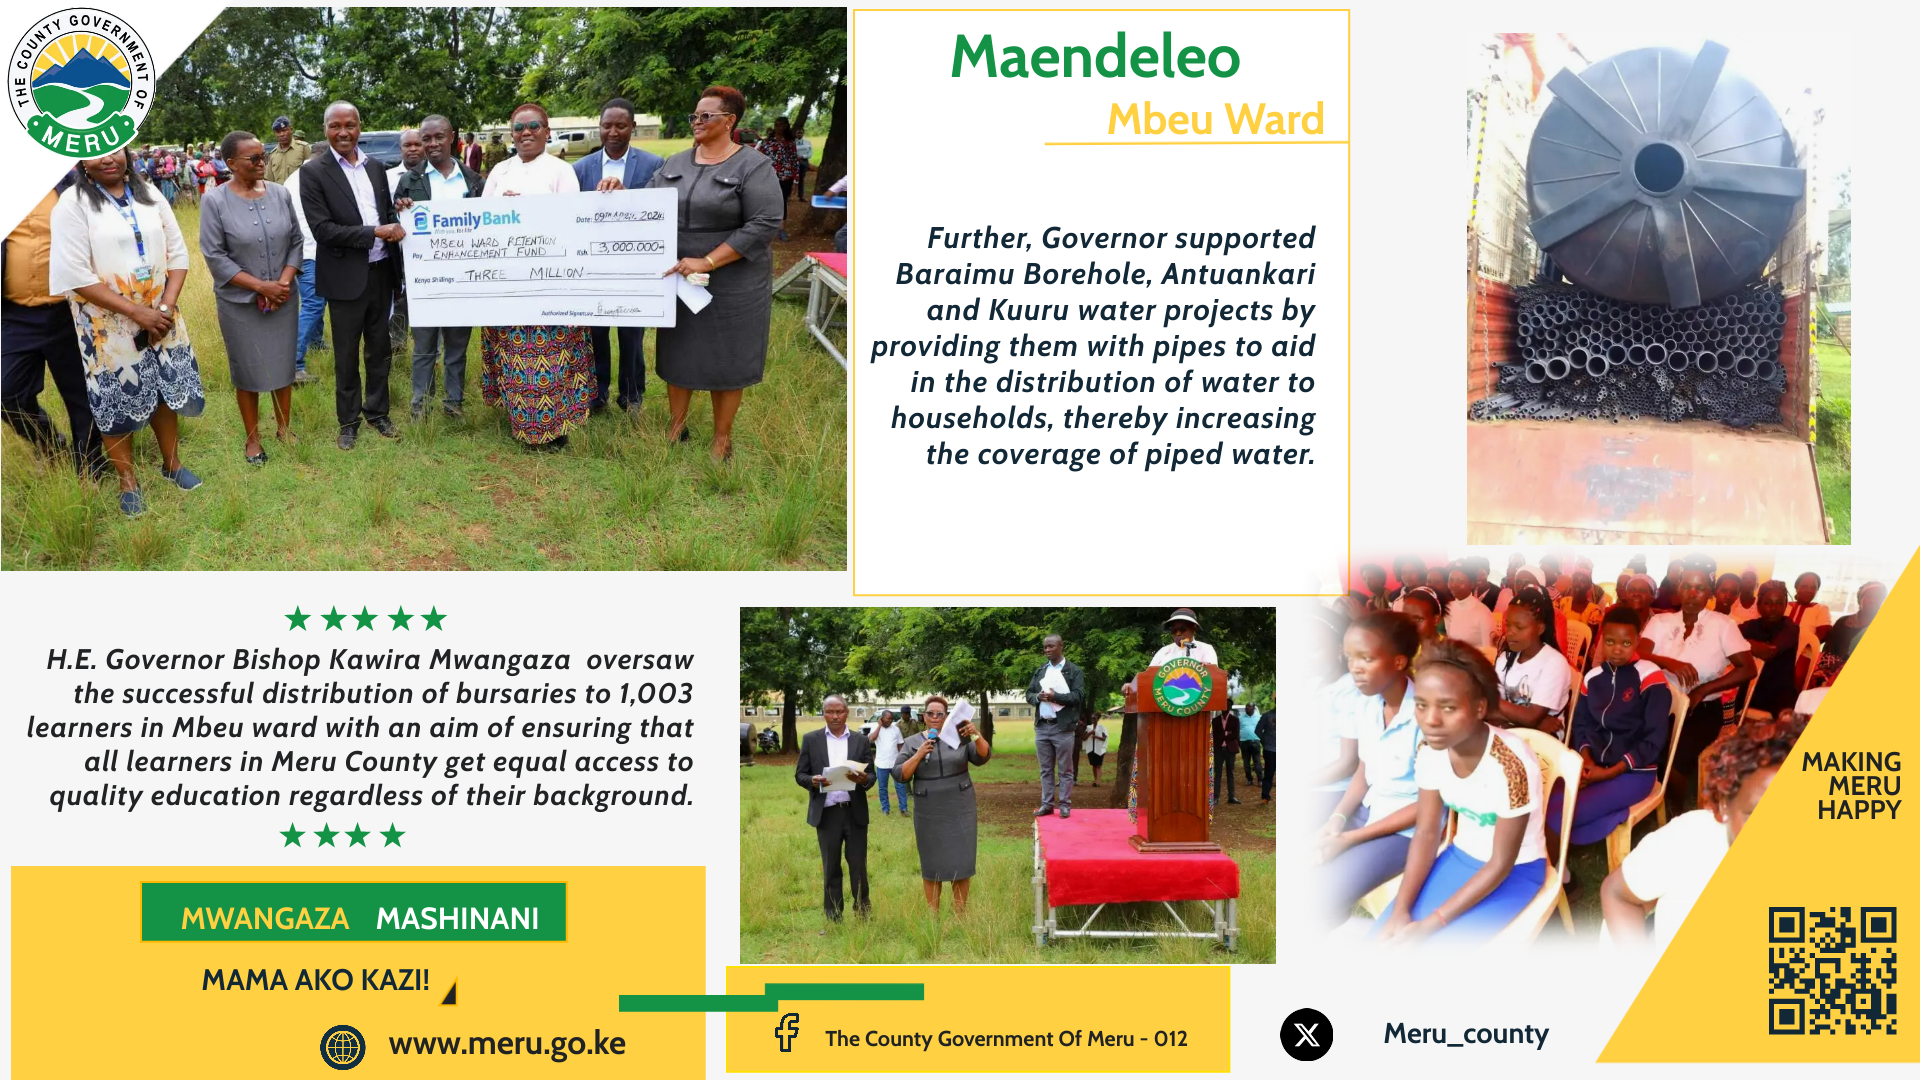 Key Initiatives in Tigania West Sub-county: Governor Mwangaza's Retention Enhancement Fund, VTC Capitation, and Ward Fund Projects